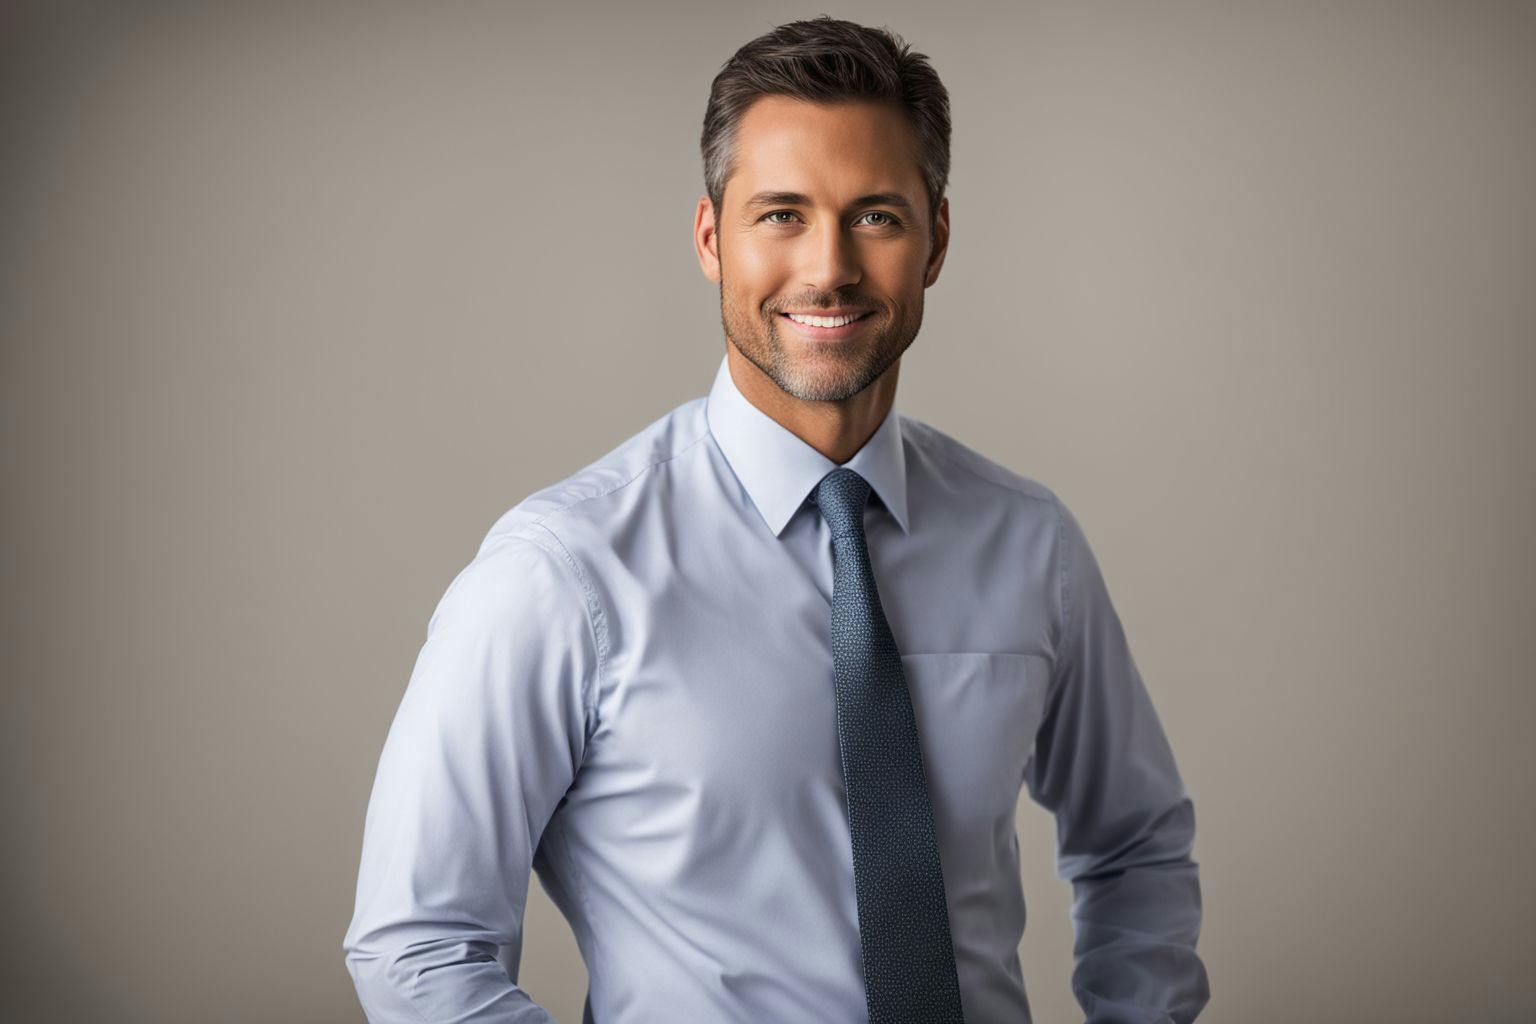 A corporate professional demonstrating a confident and smart pose in front of a neutral background, lit by natural light, shot in a professional photographic style with a medium telephoto lens.